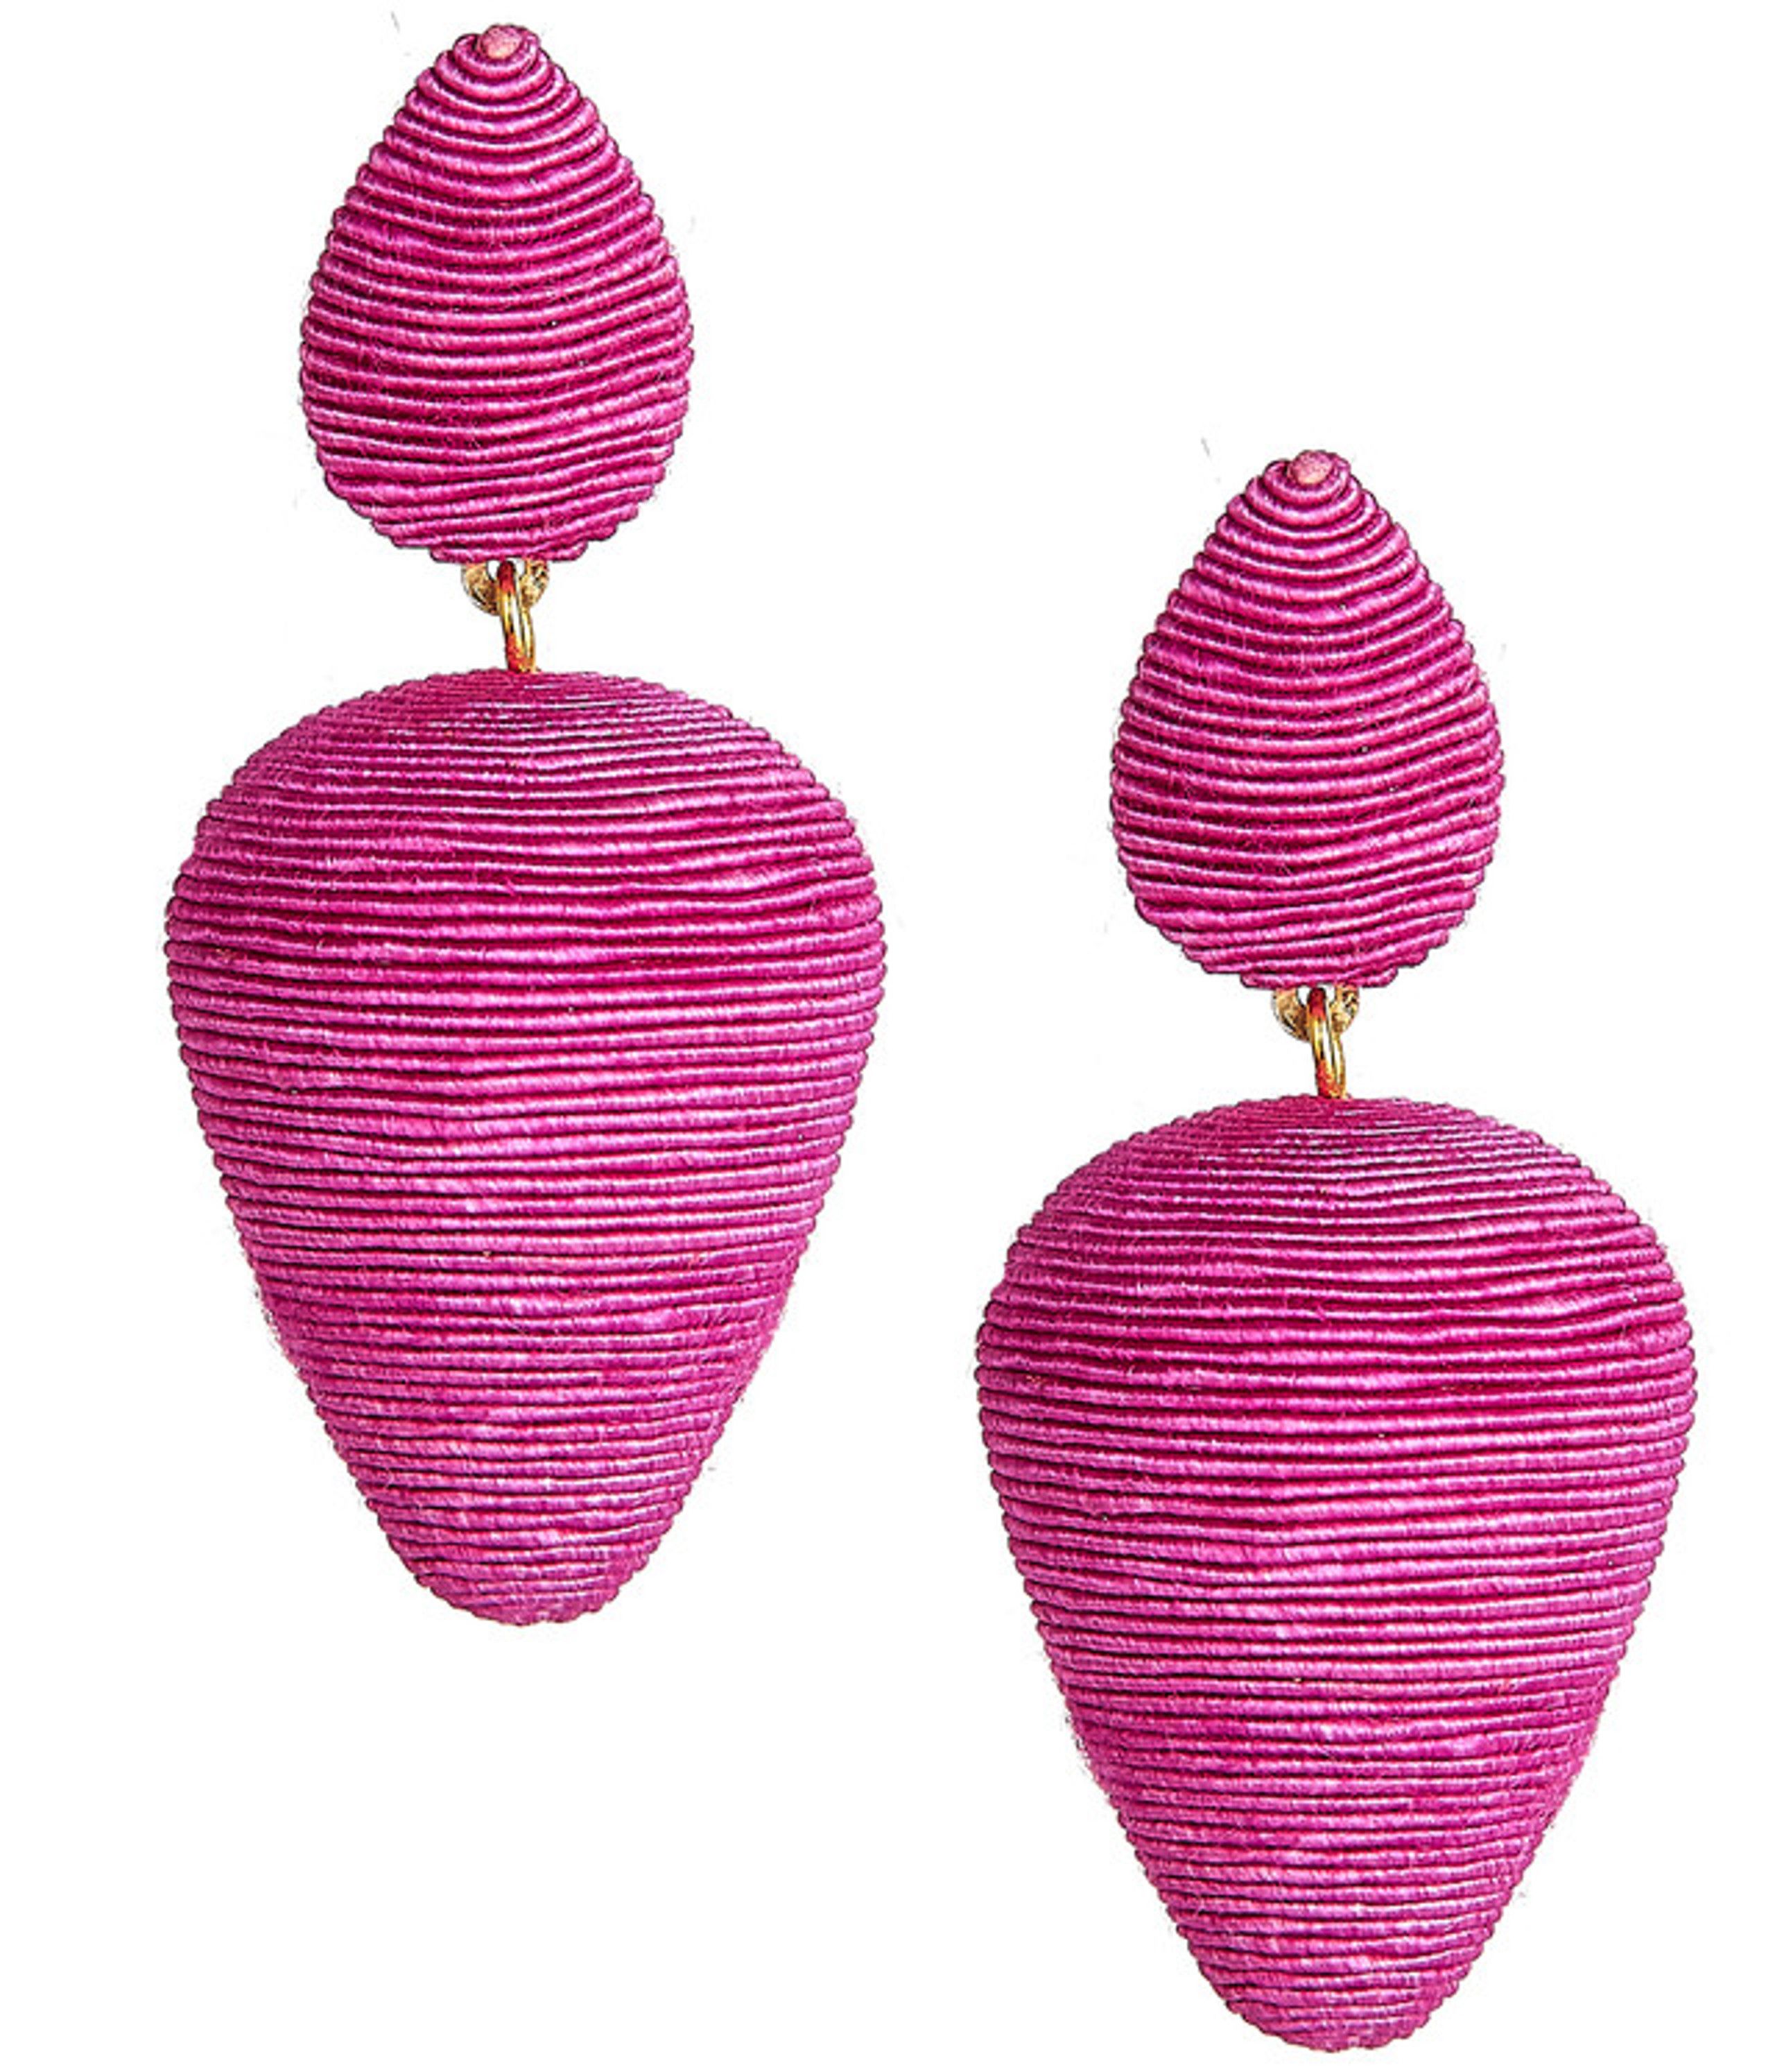 Rory Hot Pink - Silk Wrapped Earrings - Sample Sale Final Sale | Lisi Lerch Inc